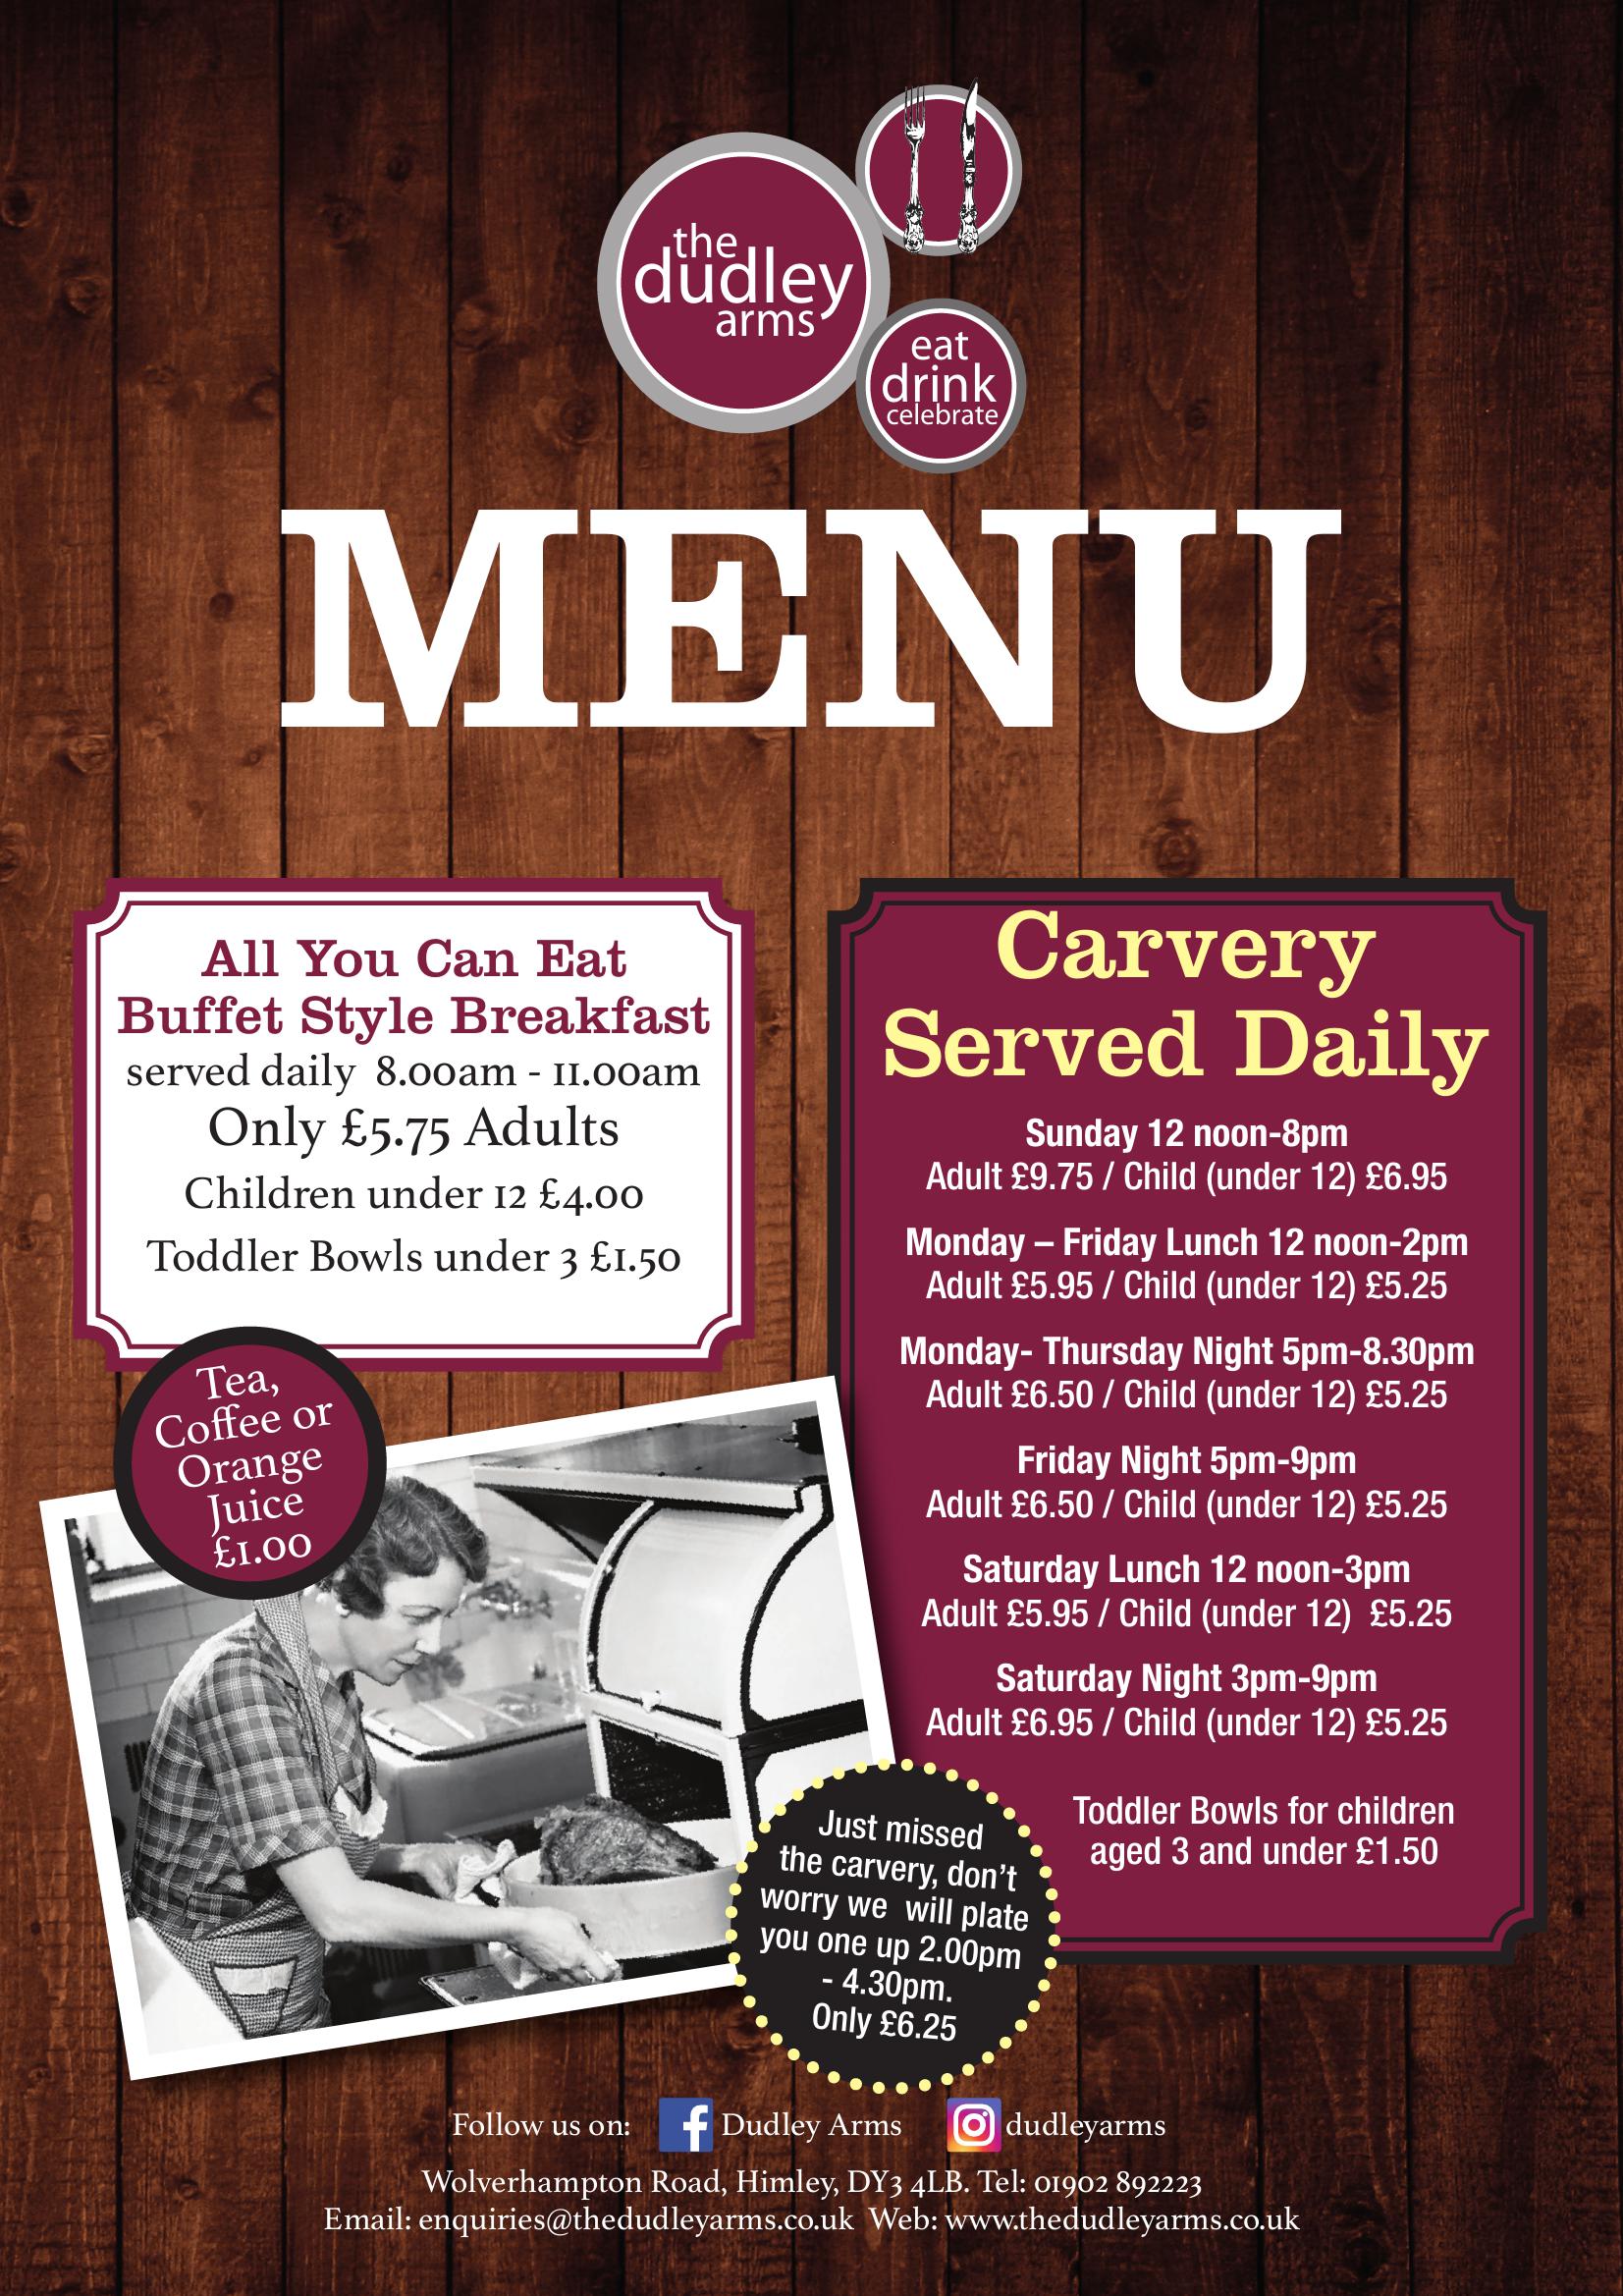 The Dudley Arms - main menu